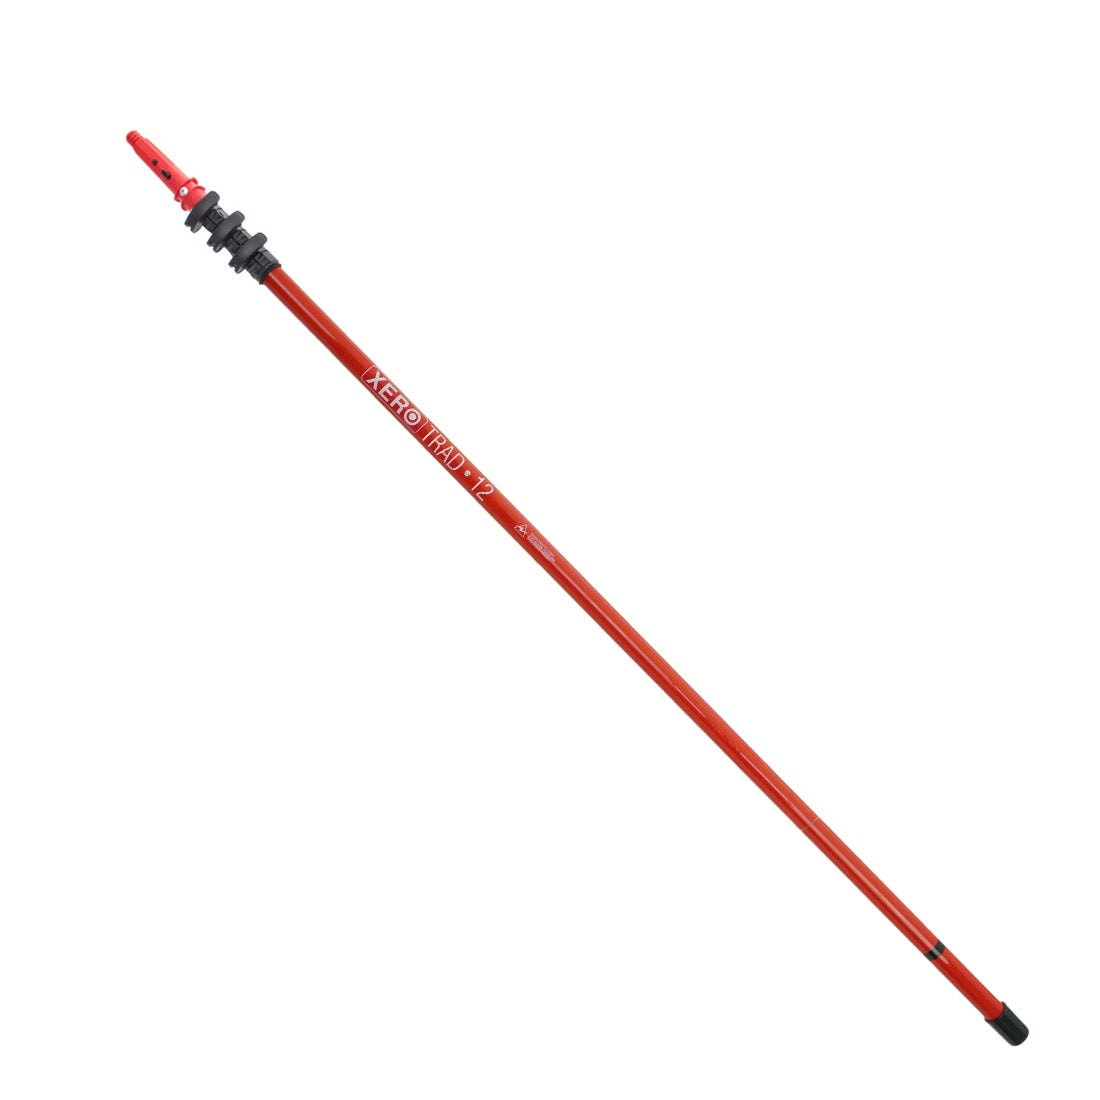 XERO Carbon Fiber Trad Pole 2.0 Unger Pole Tip Red 12 Foot Front View